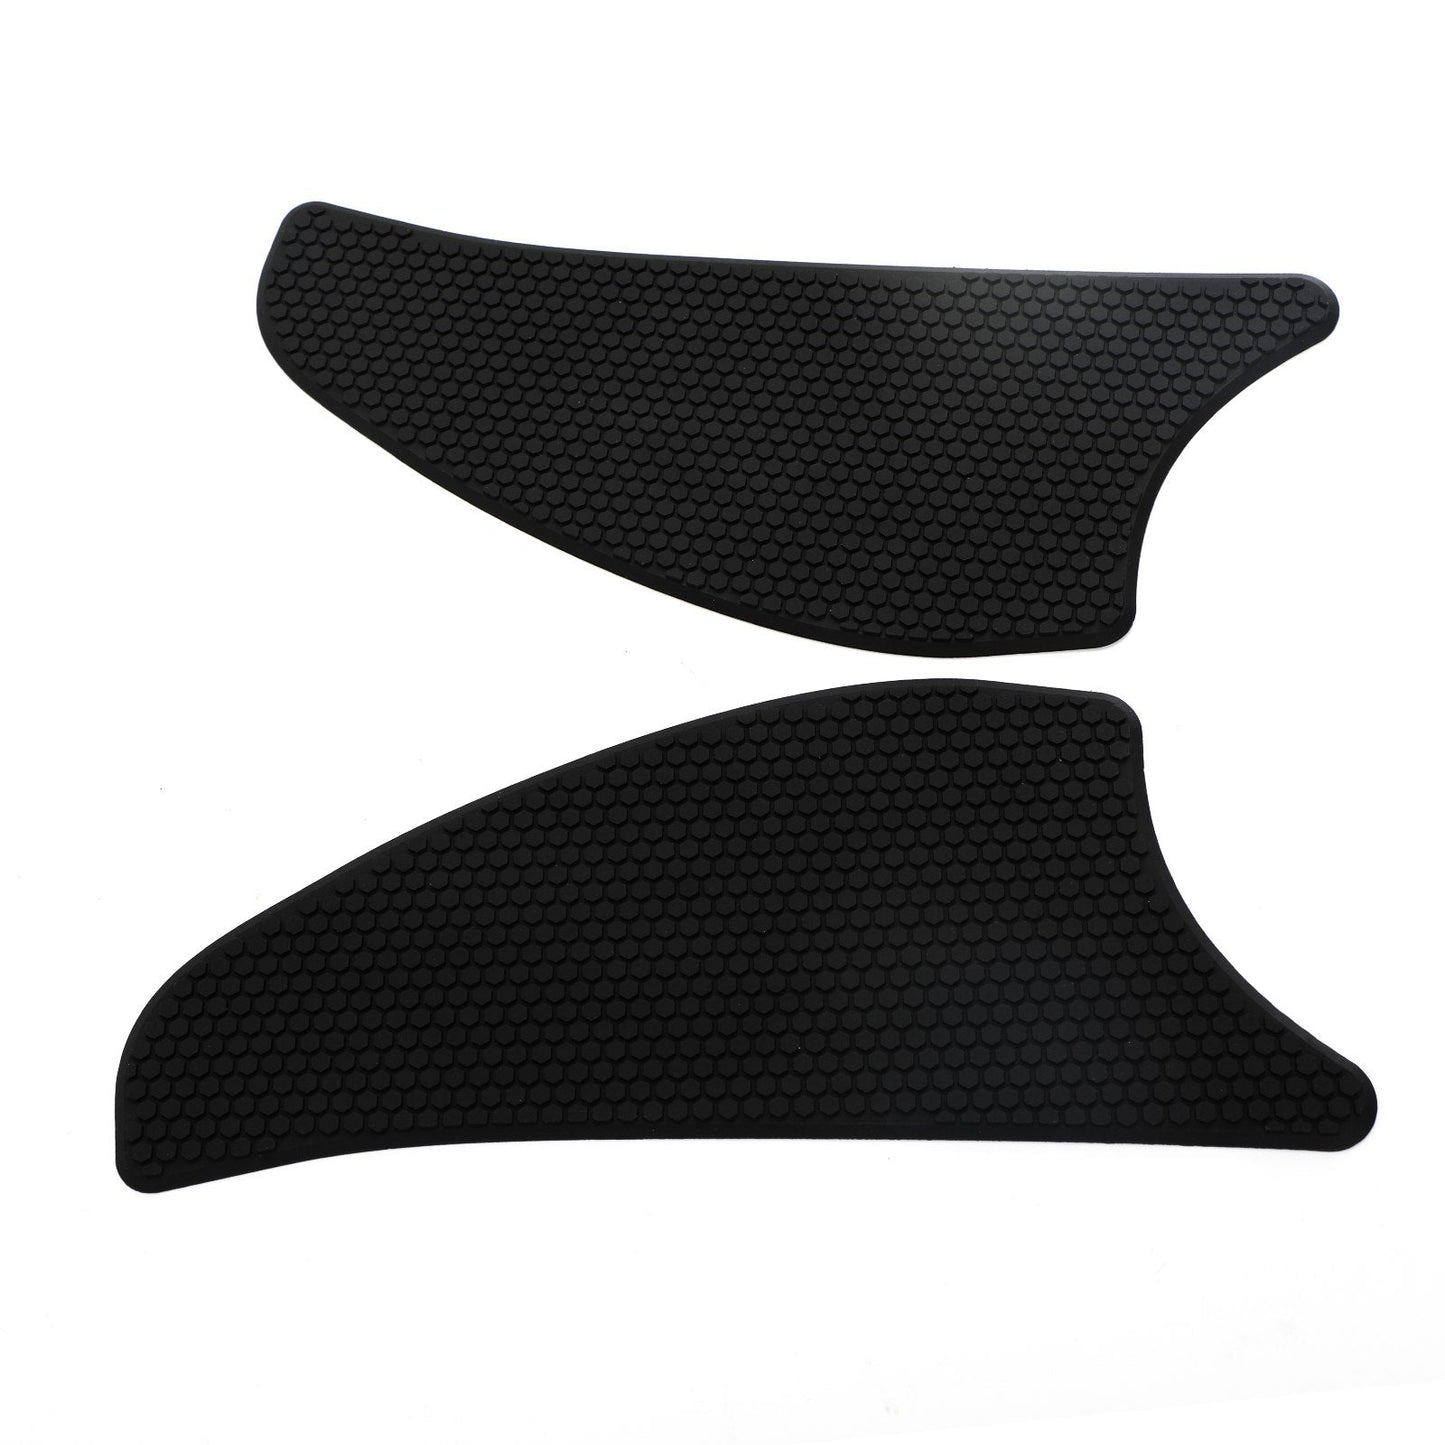 2x Side Tank Traction Grips Pads Fit for Kawasaki Versys 1000 KLZ1000 2015-2019